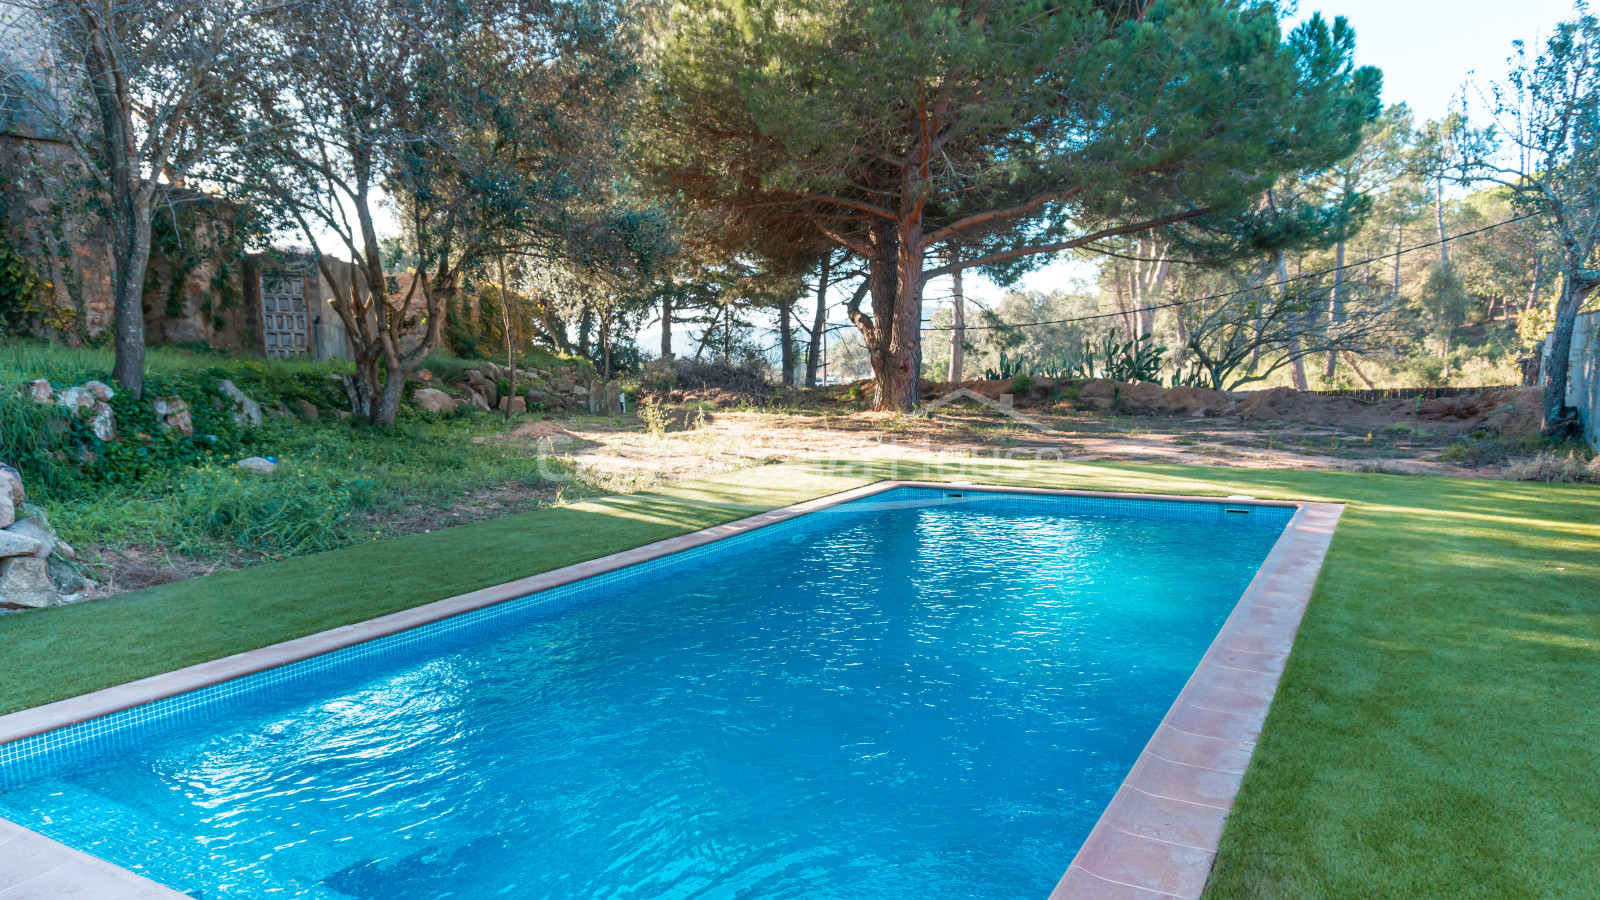 Catalan Masia for sale in Sant Feliu Guíxols with imposing defense tower and garden with pool